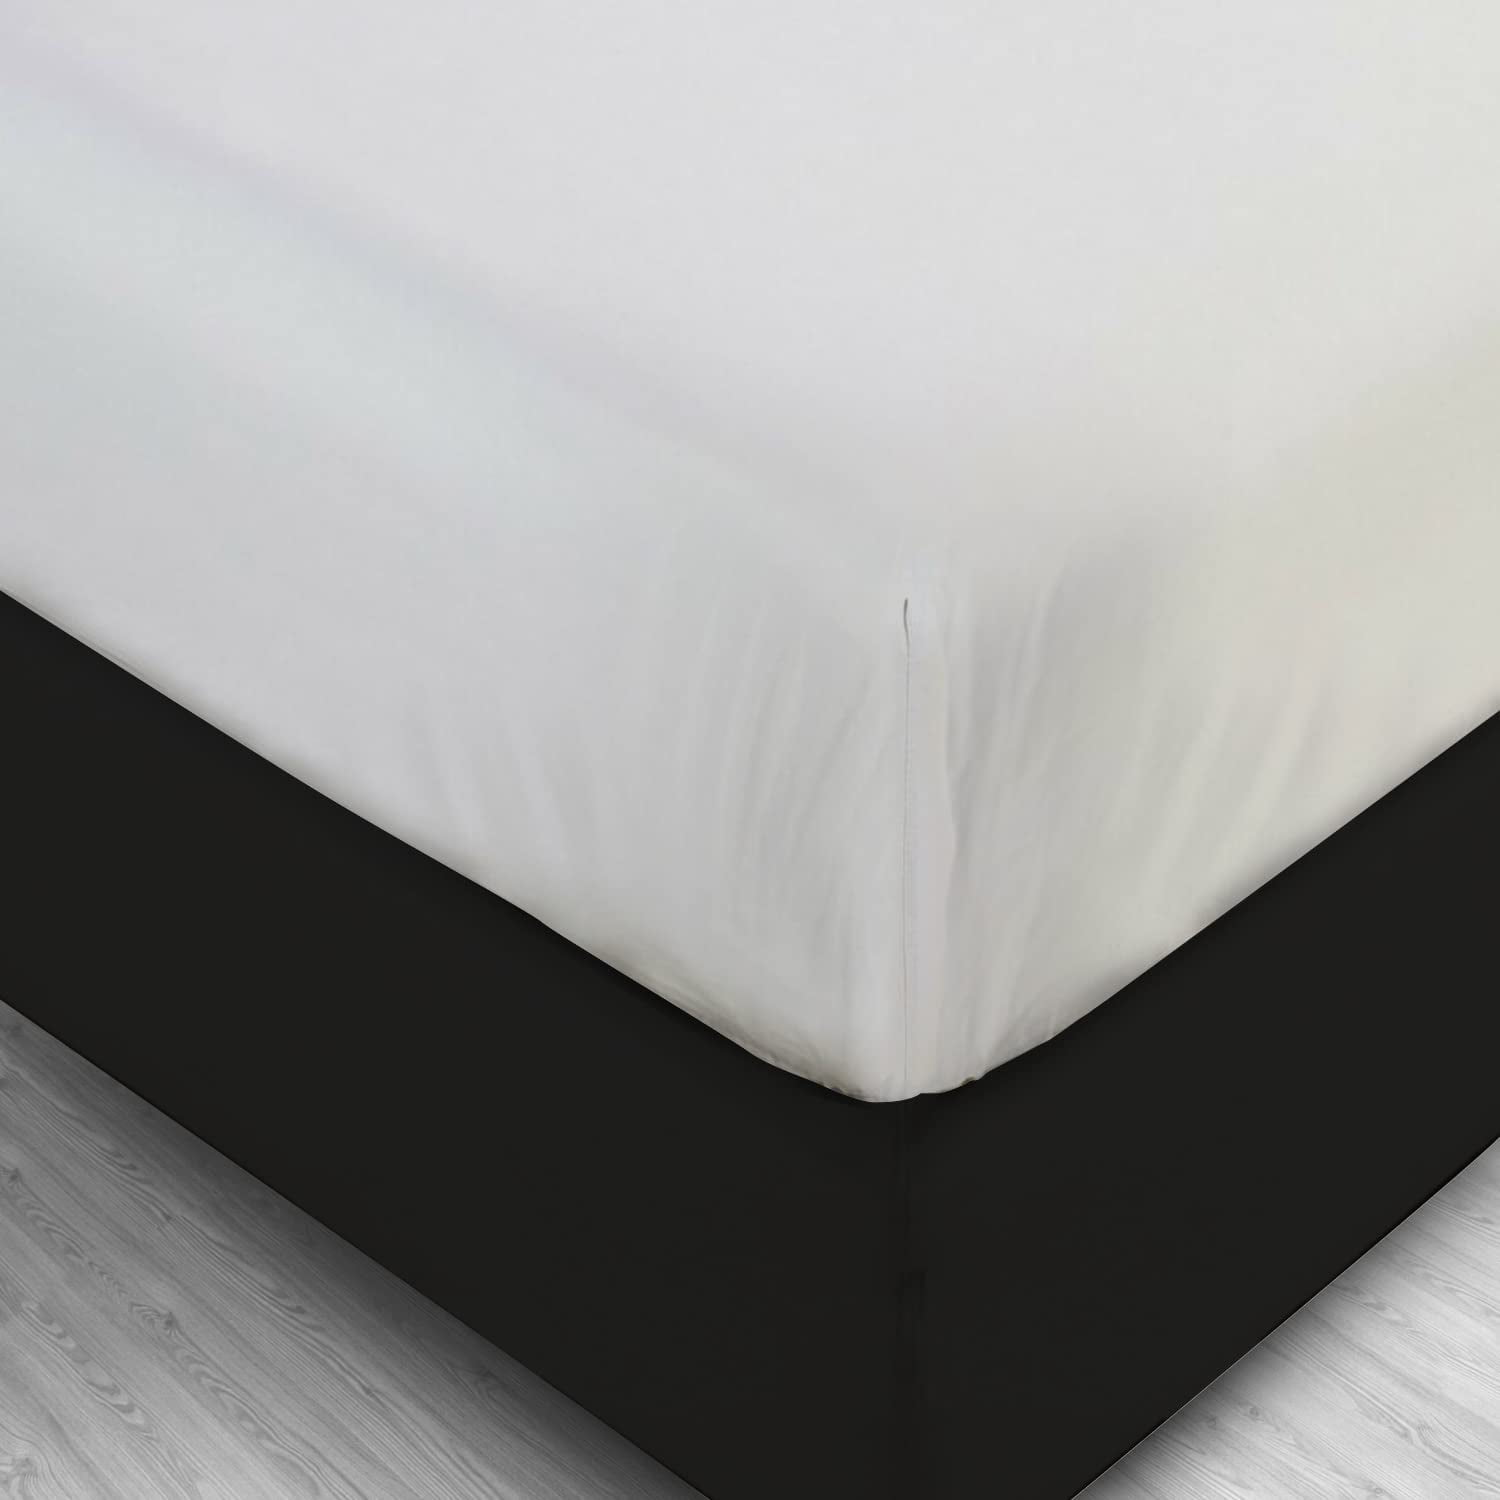 2x Kingsize Mattress Cover Soft Vinyl Plastic Fitted Bed Sheet Protector Protect 